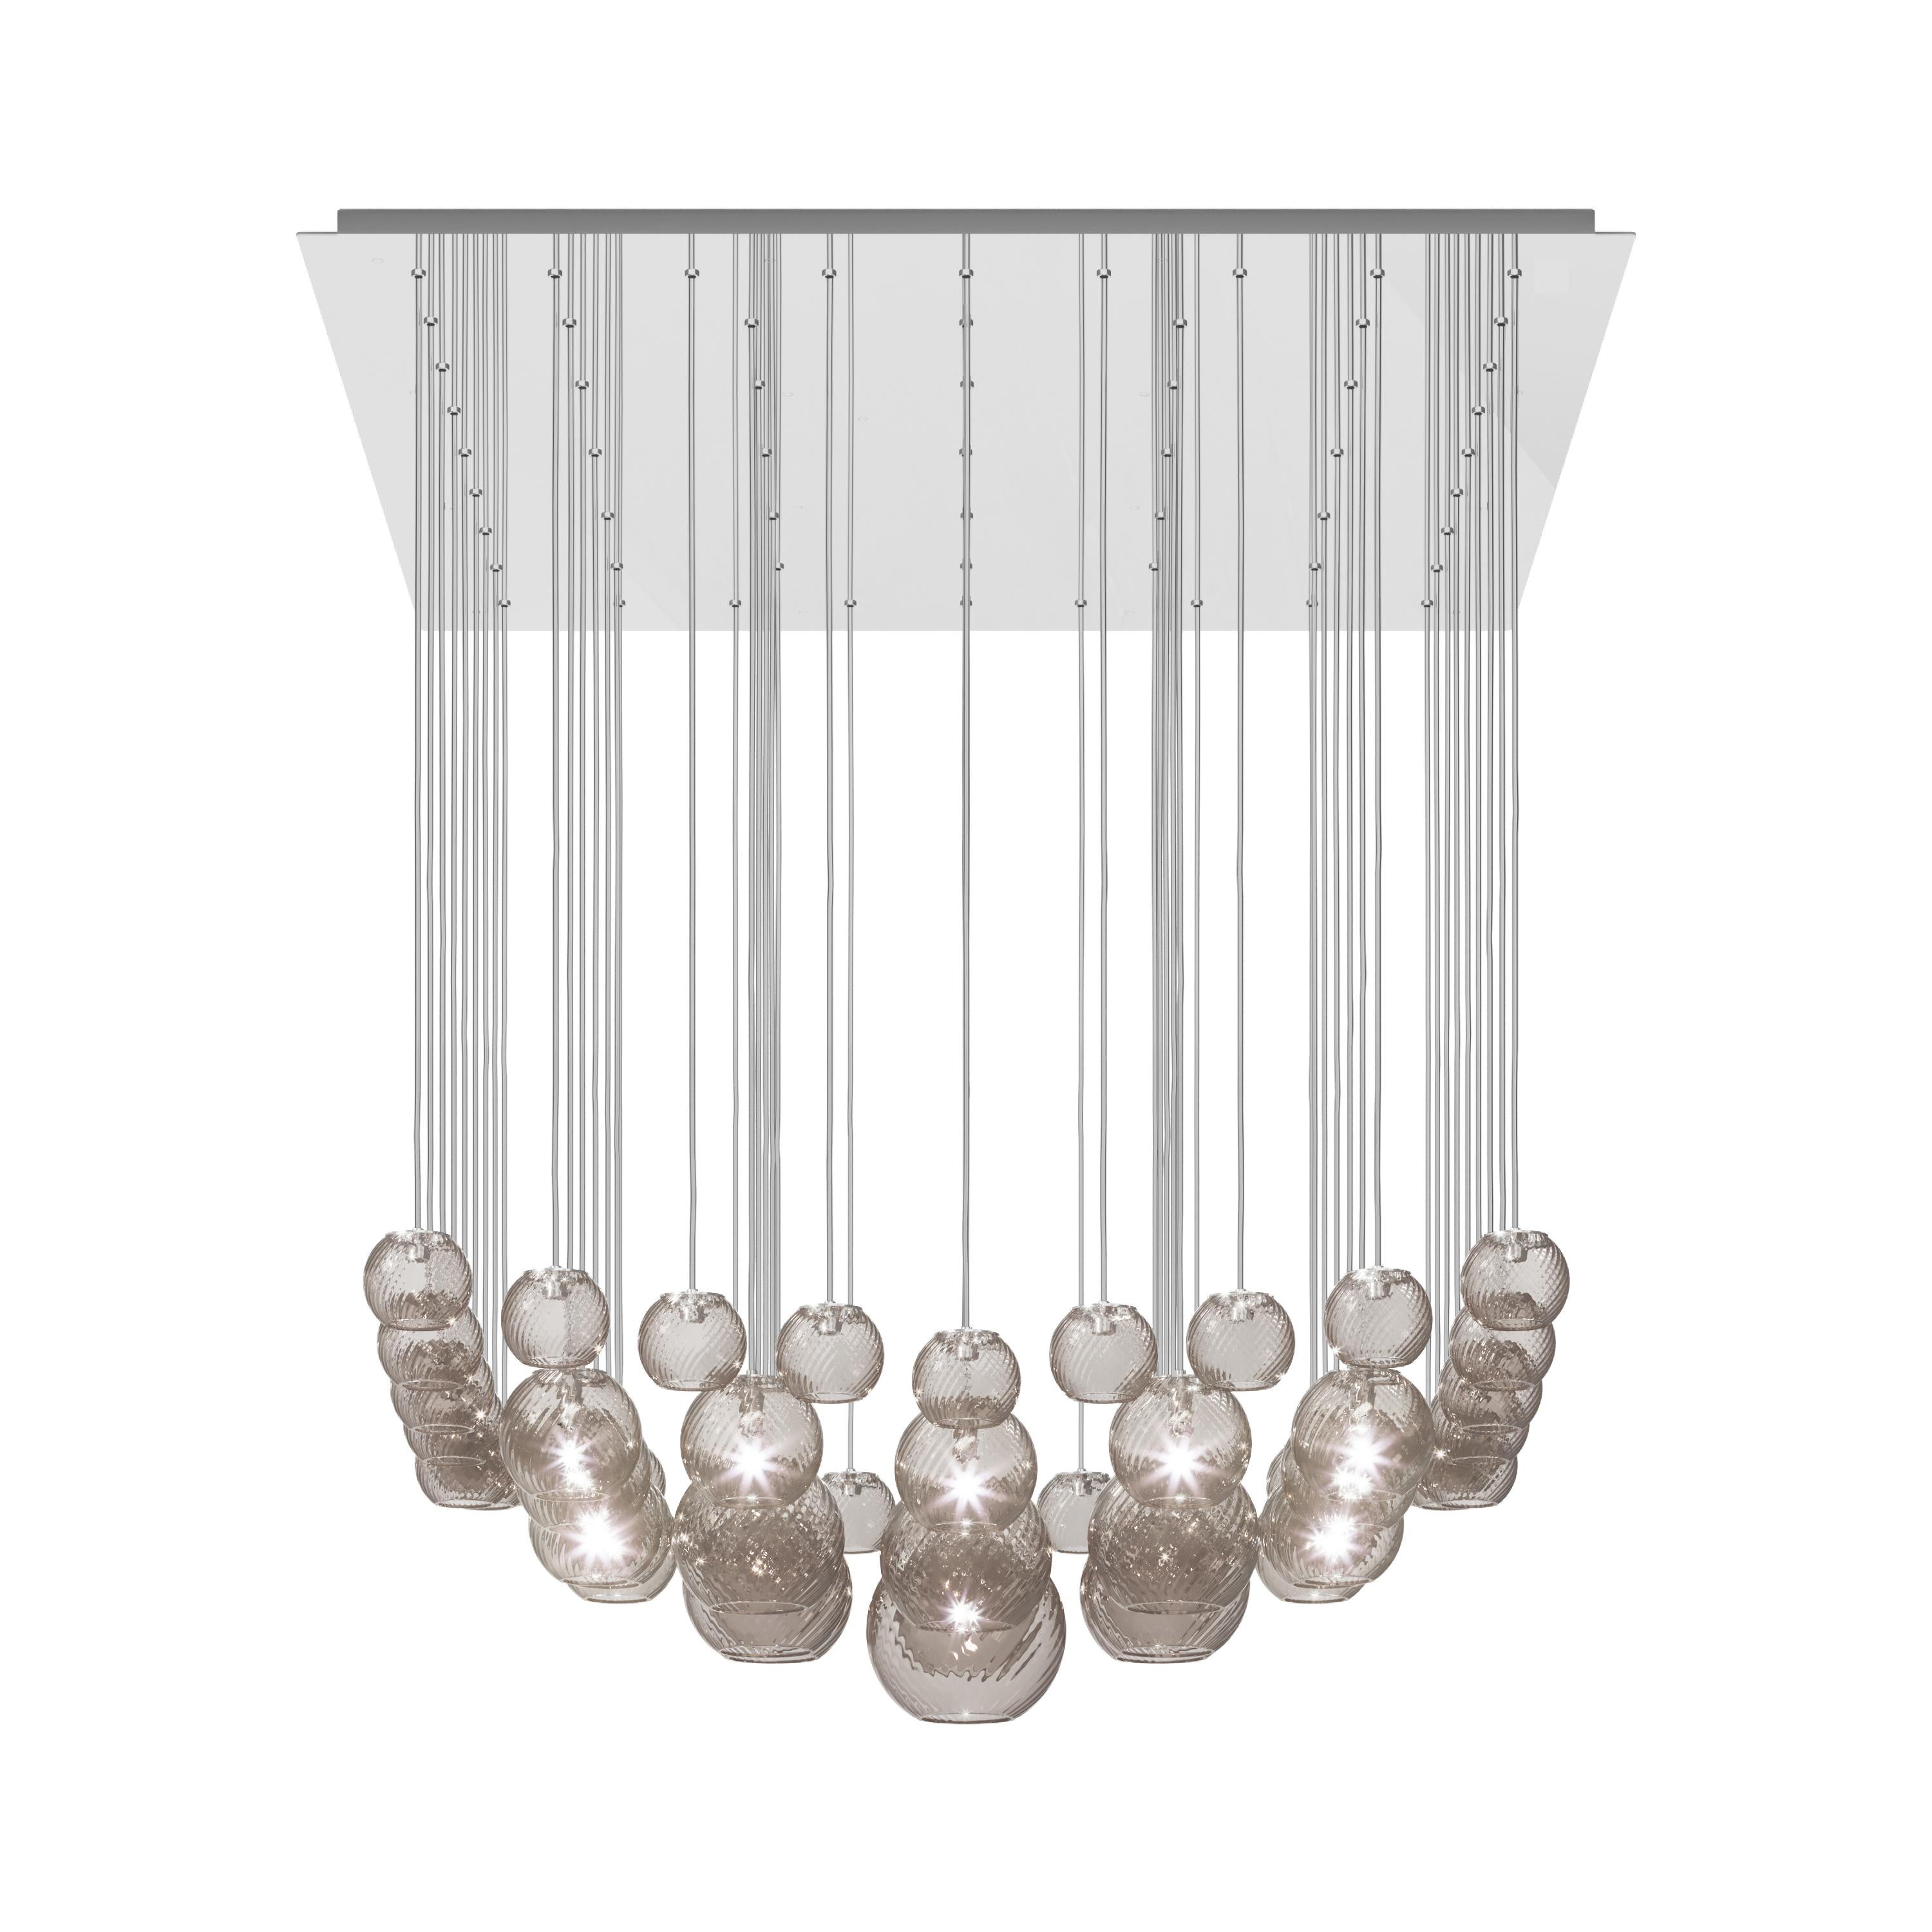 Modern Vistosi Pendant Light in Smoky Striped Glass And Mirrored Steel Frame For Sale